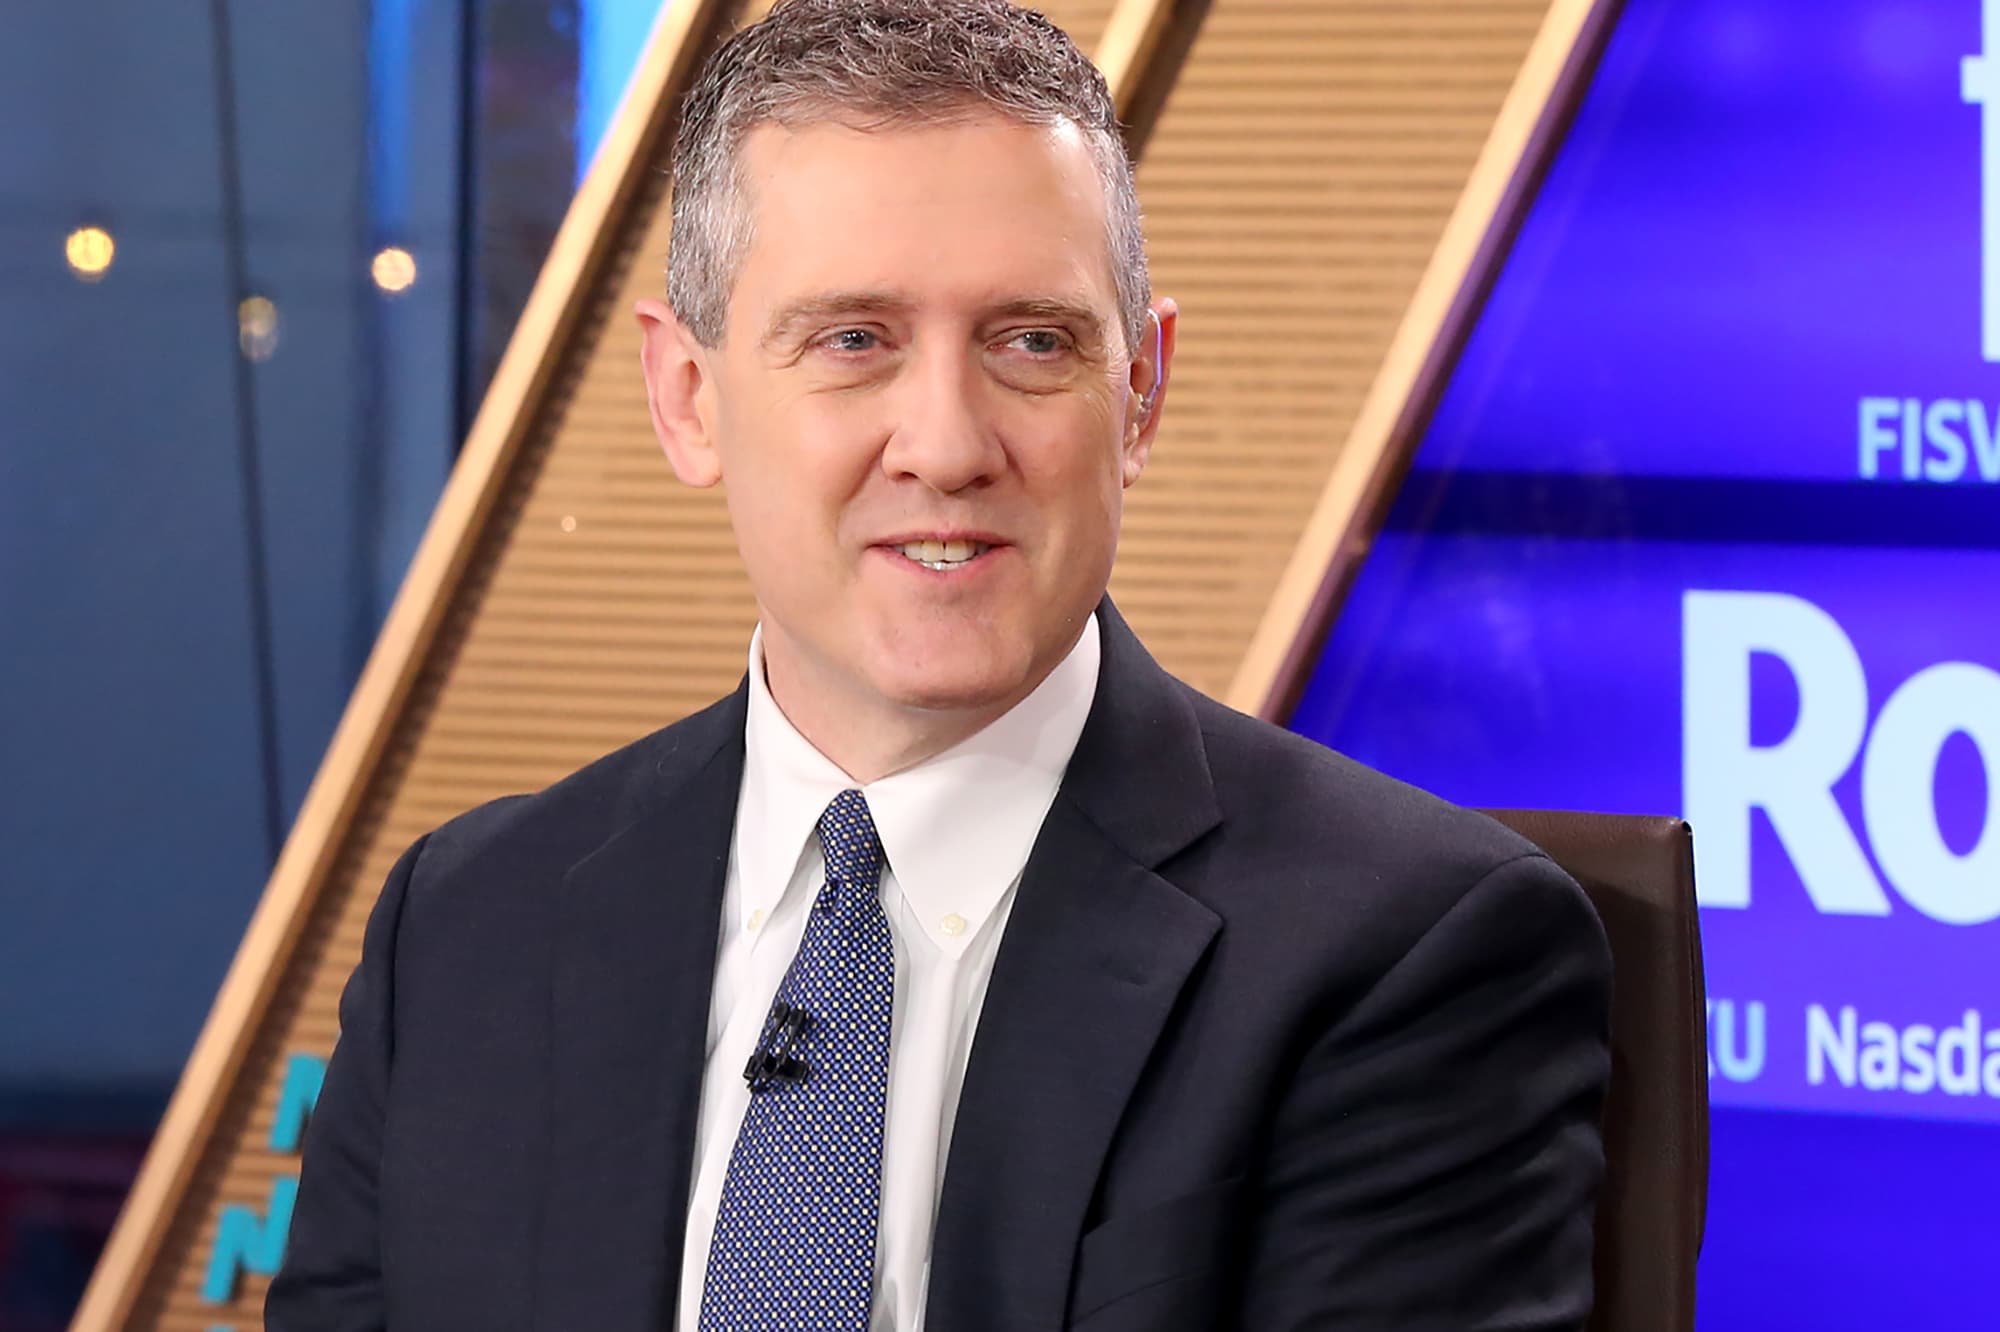 The Fed’s Bullard does not see the asset bubble and policy doubts will soon strengthen